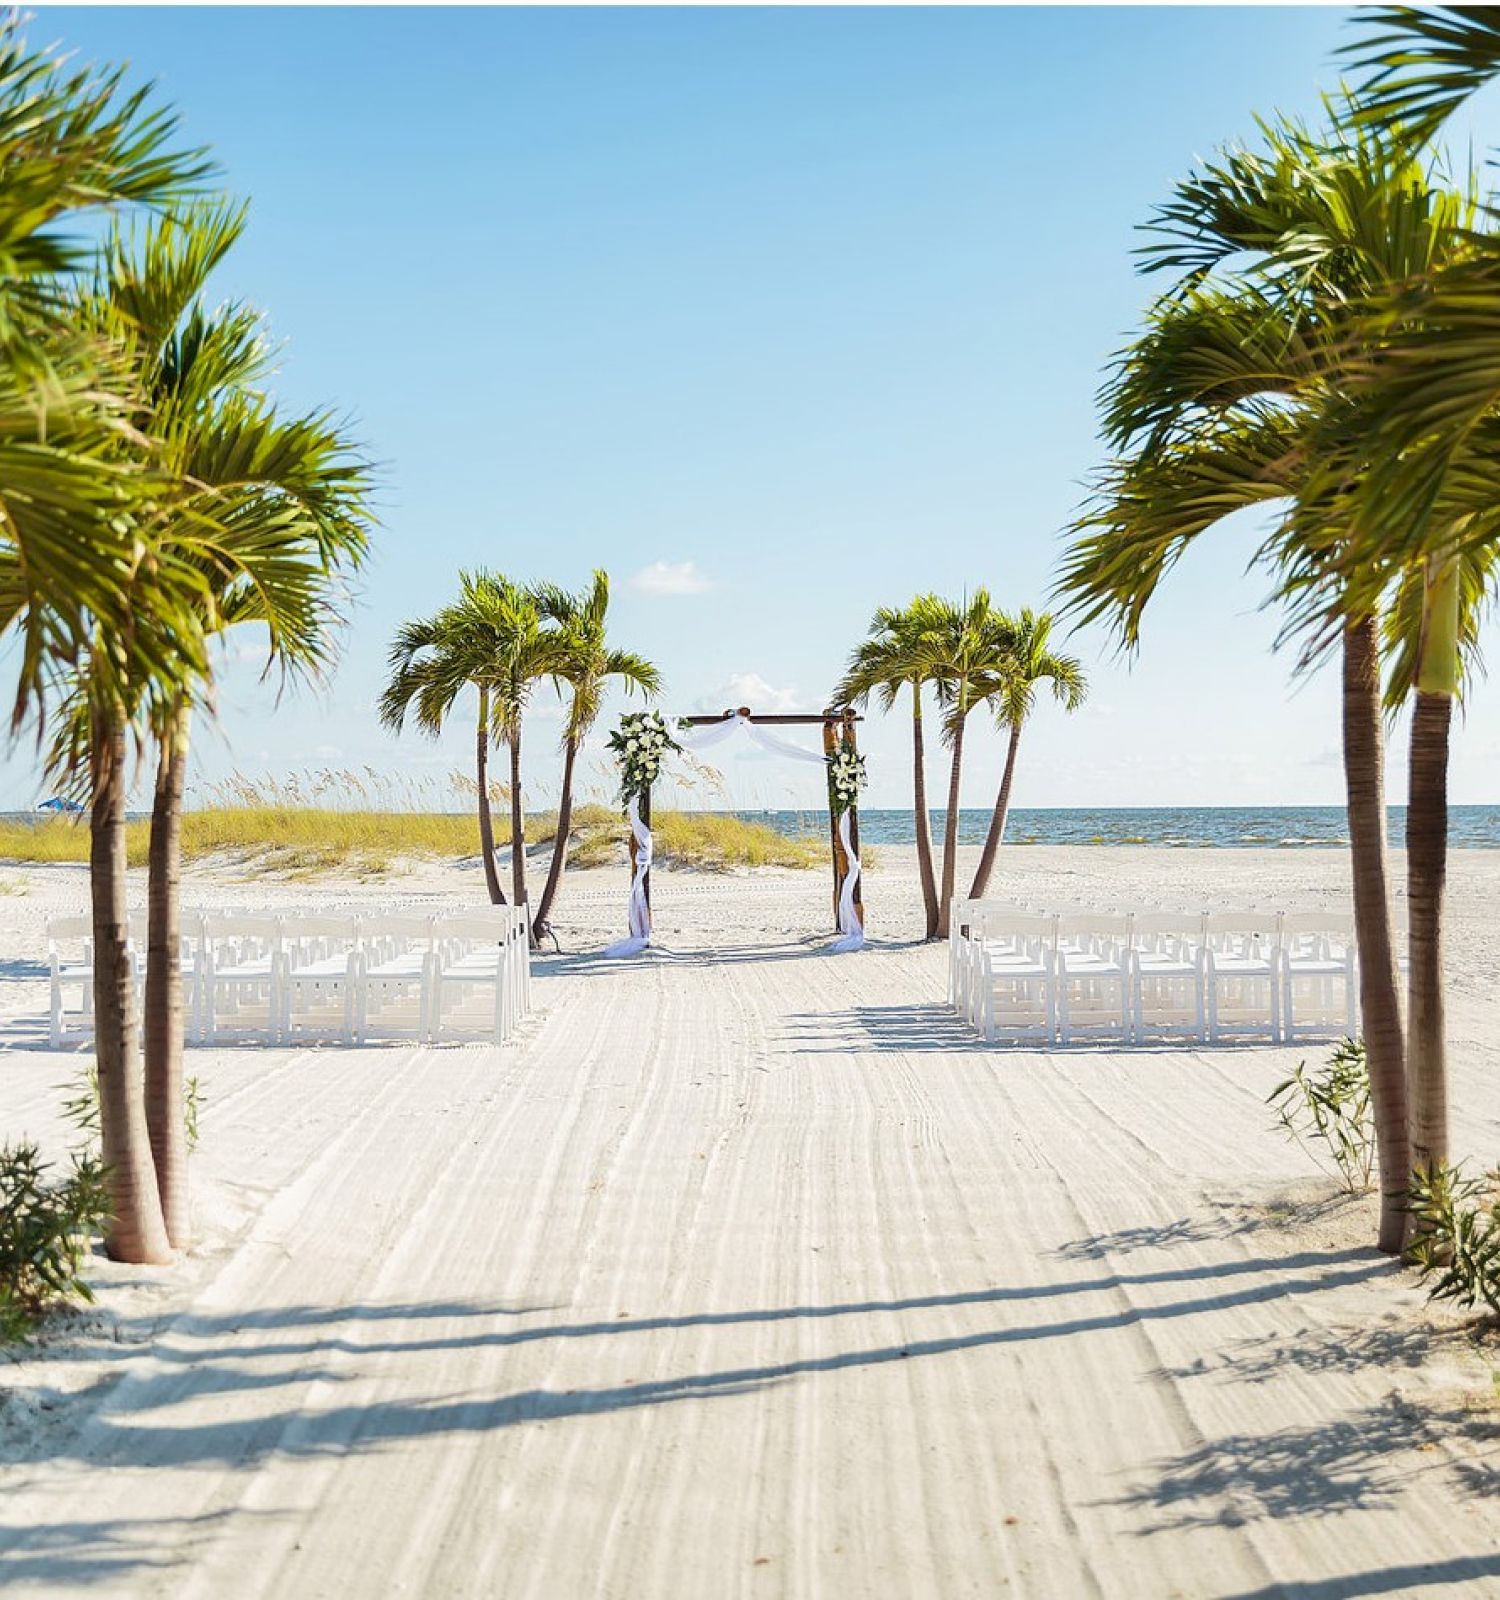 A beachside setup with palm trees, white chairs, and an archway, likely prepared for an outdoor event or wedding ceremony, is shown.